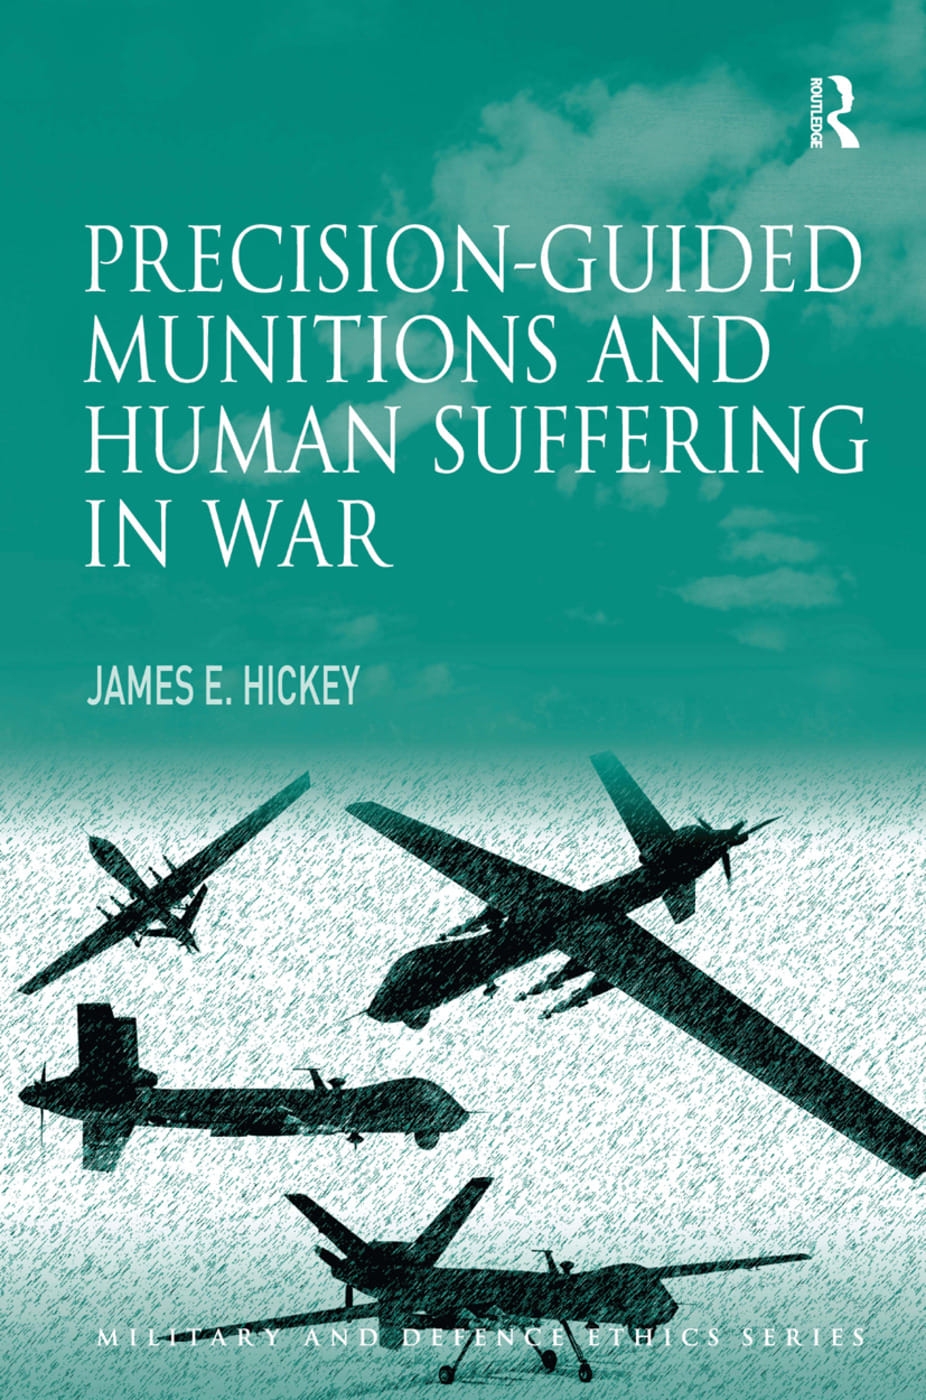 Precision-Guided Munitions and Human Suffering in War. James E. Hickey